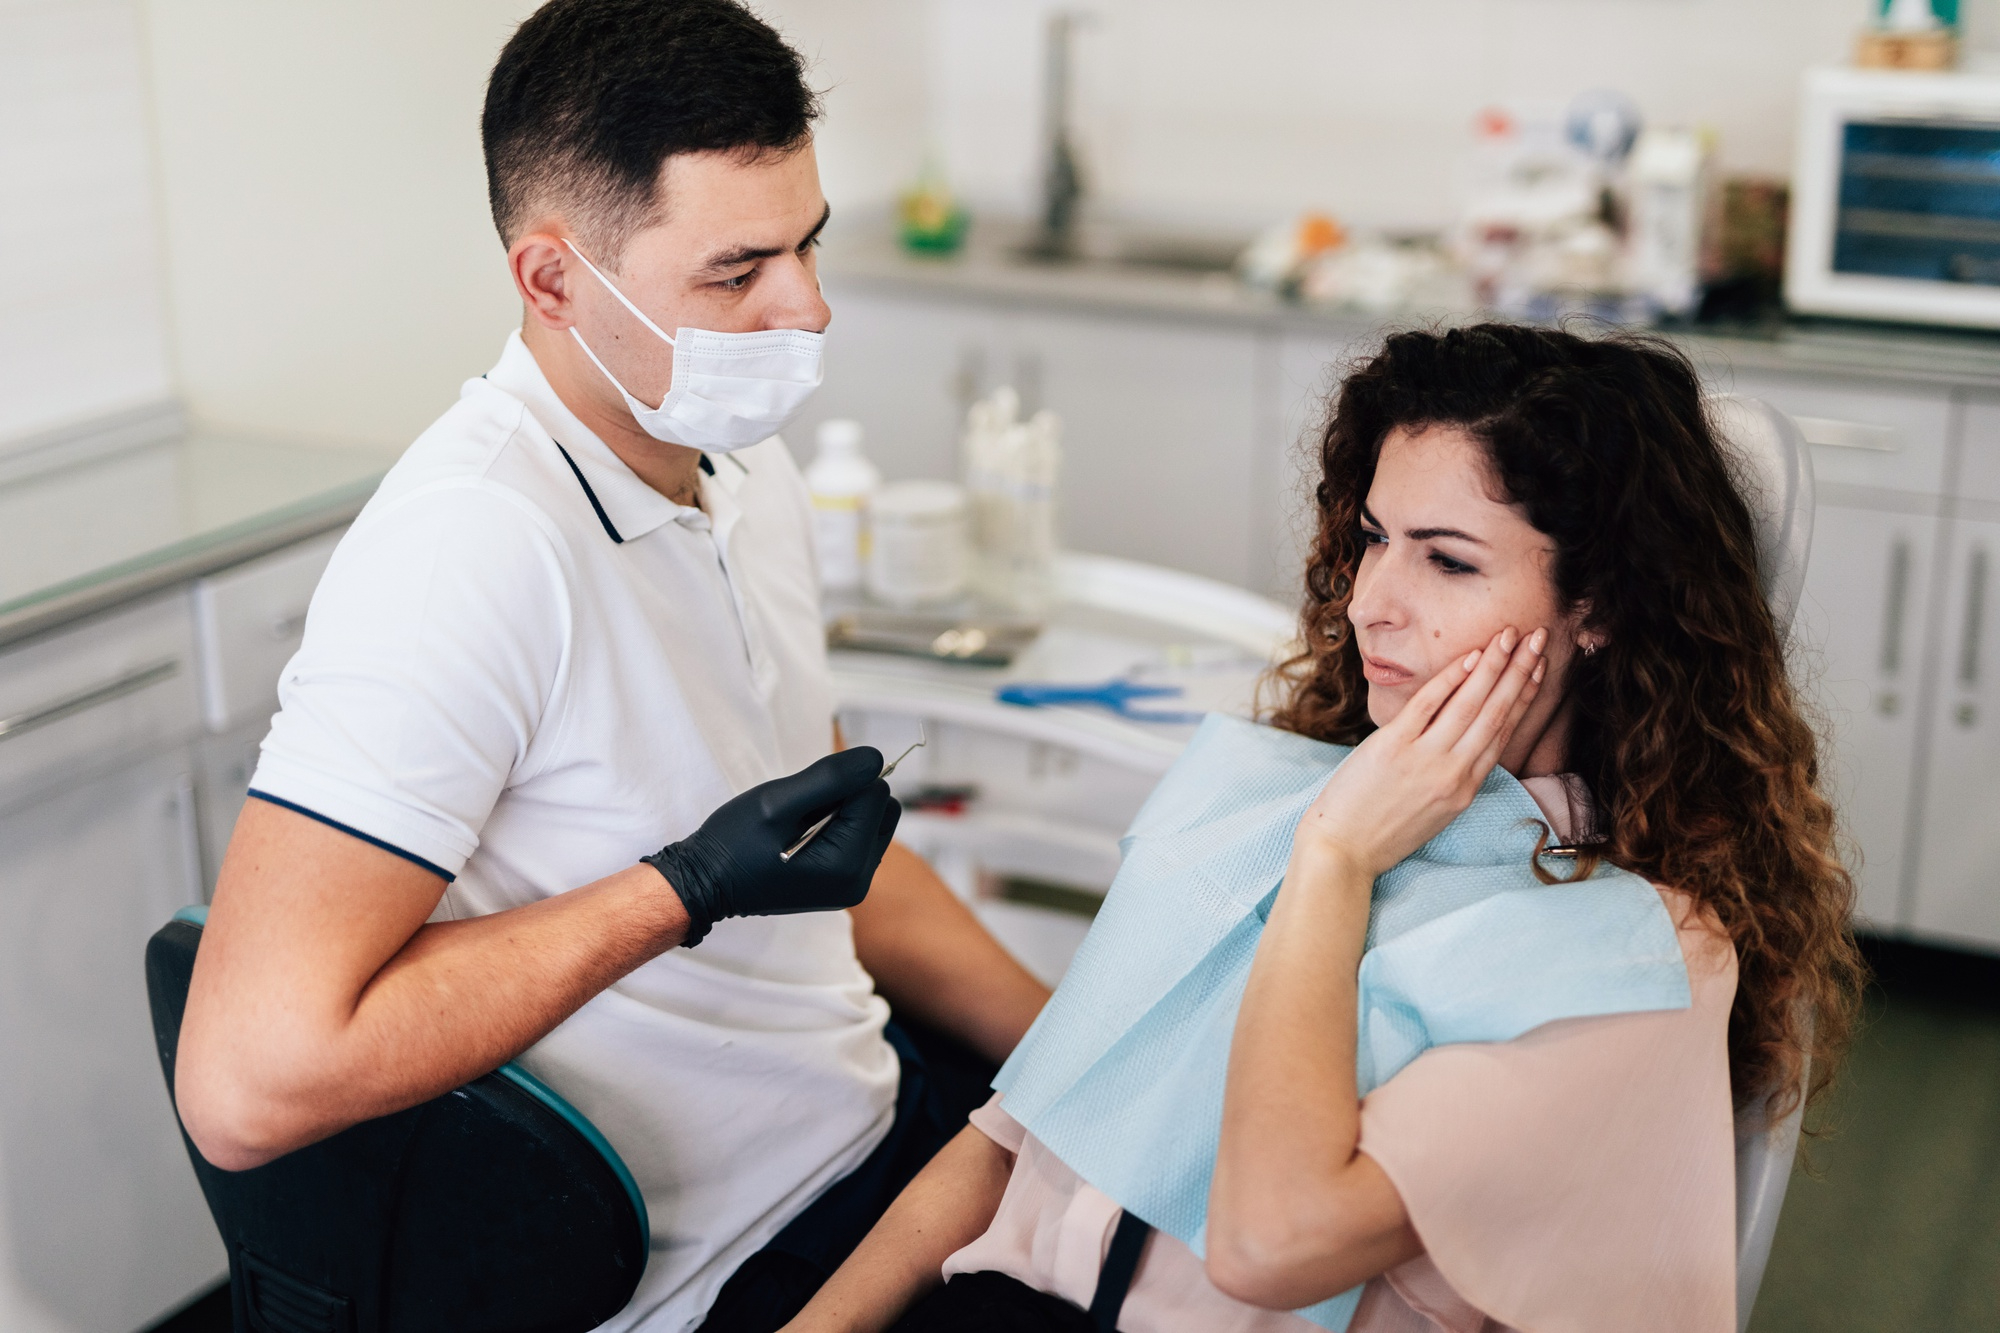 A young woman at the dentist's office and chair holding a hand to the side of her face and looking worried.